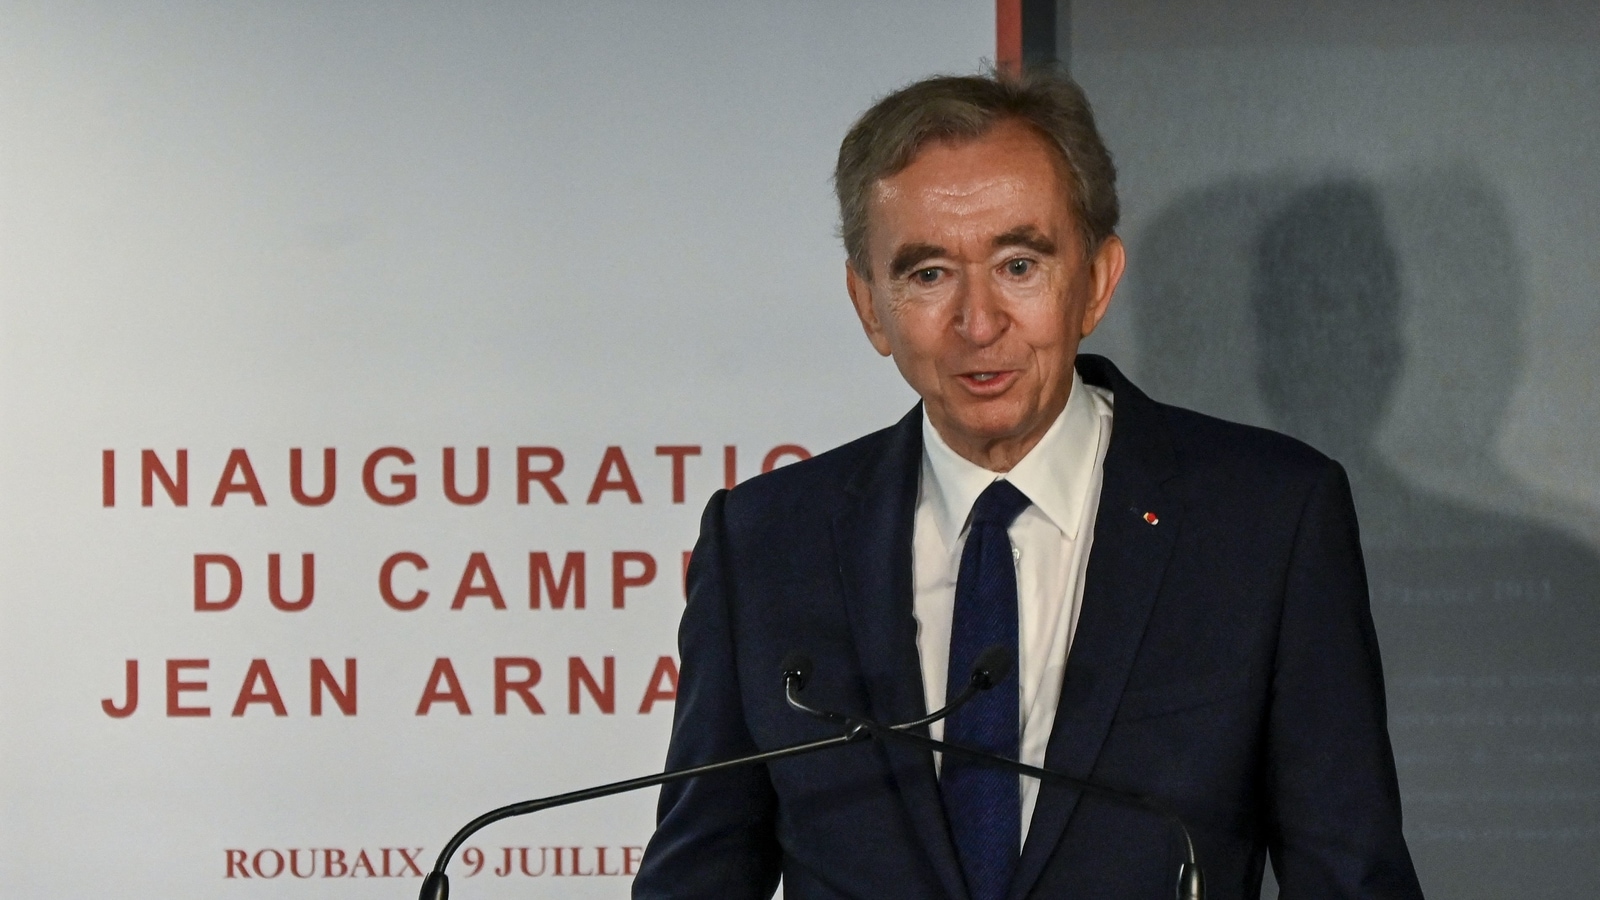 Billionaire Bernard Arnault 'on track' to become world's richest person:  Report